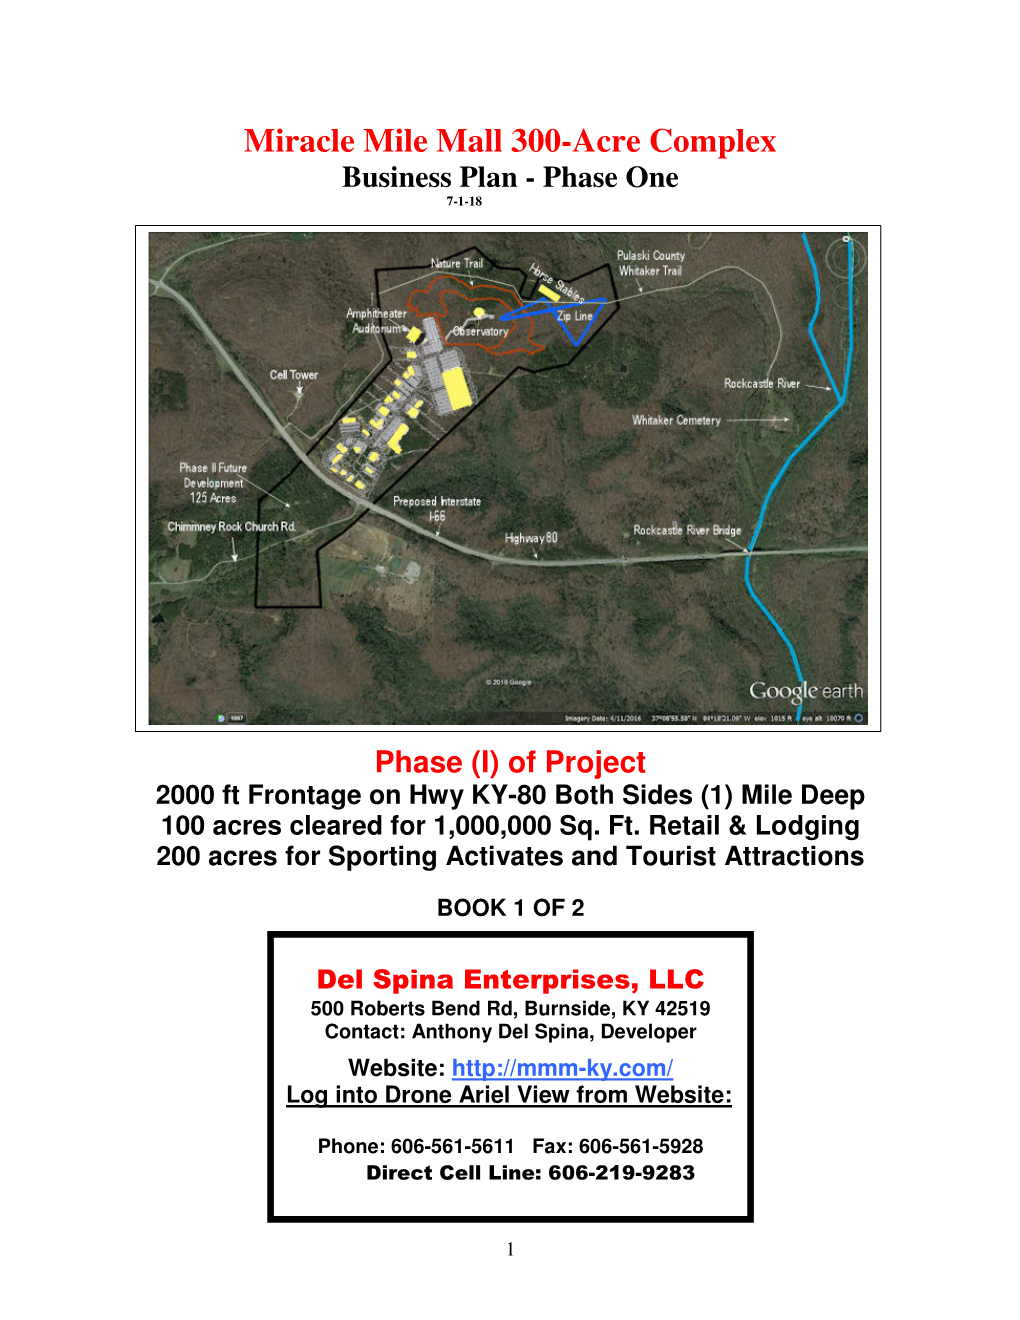 Miracle Mile Mall 300-Acre Complex Business Plan - Phase One 7-1-18